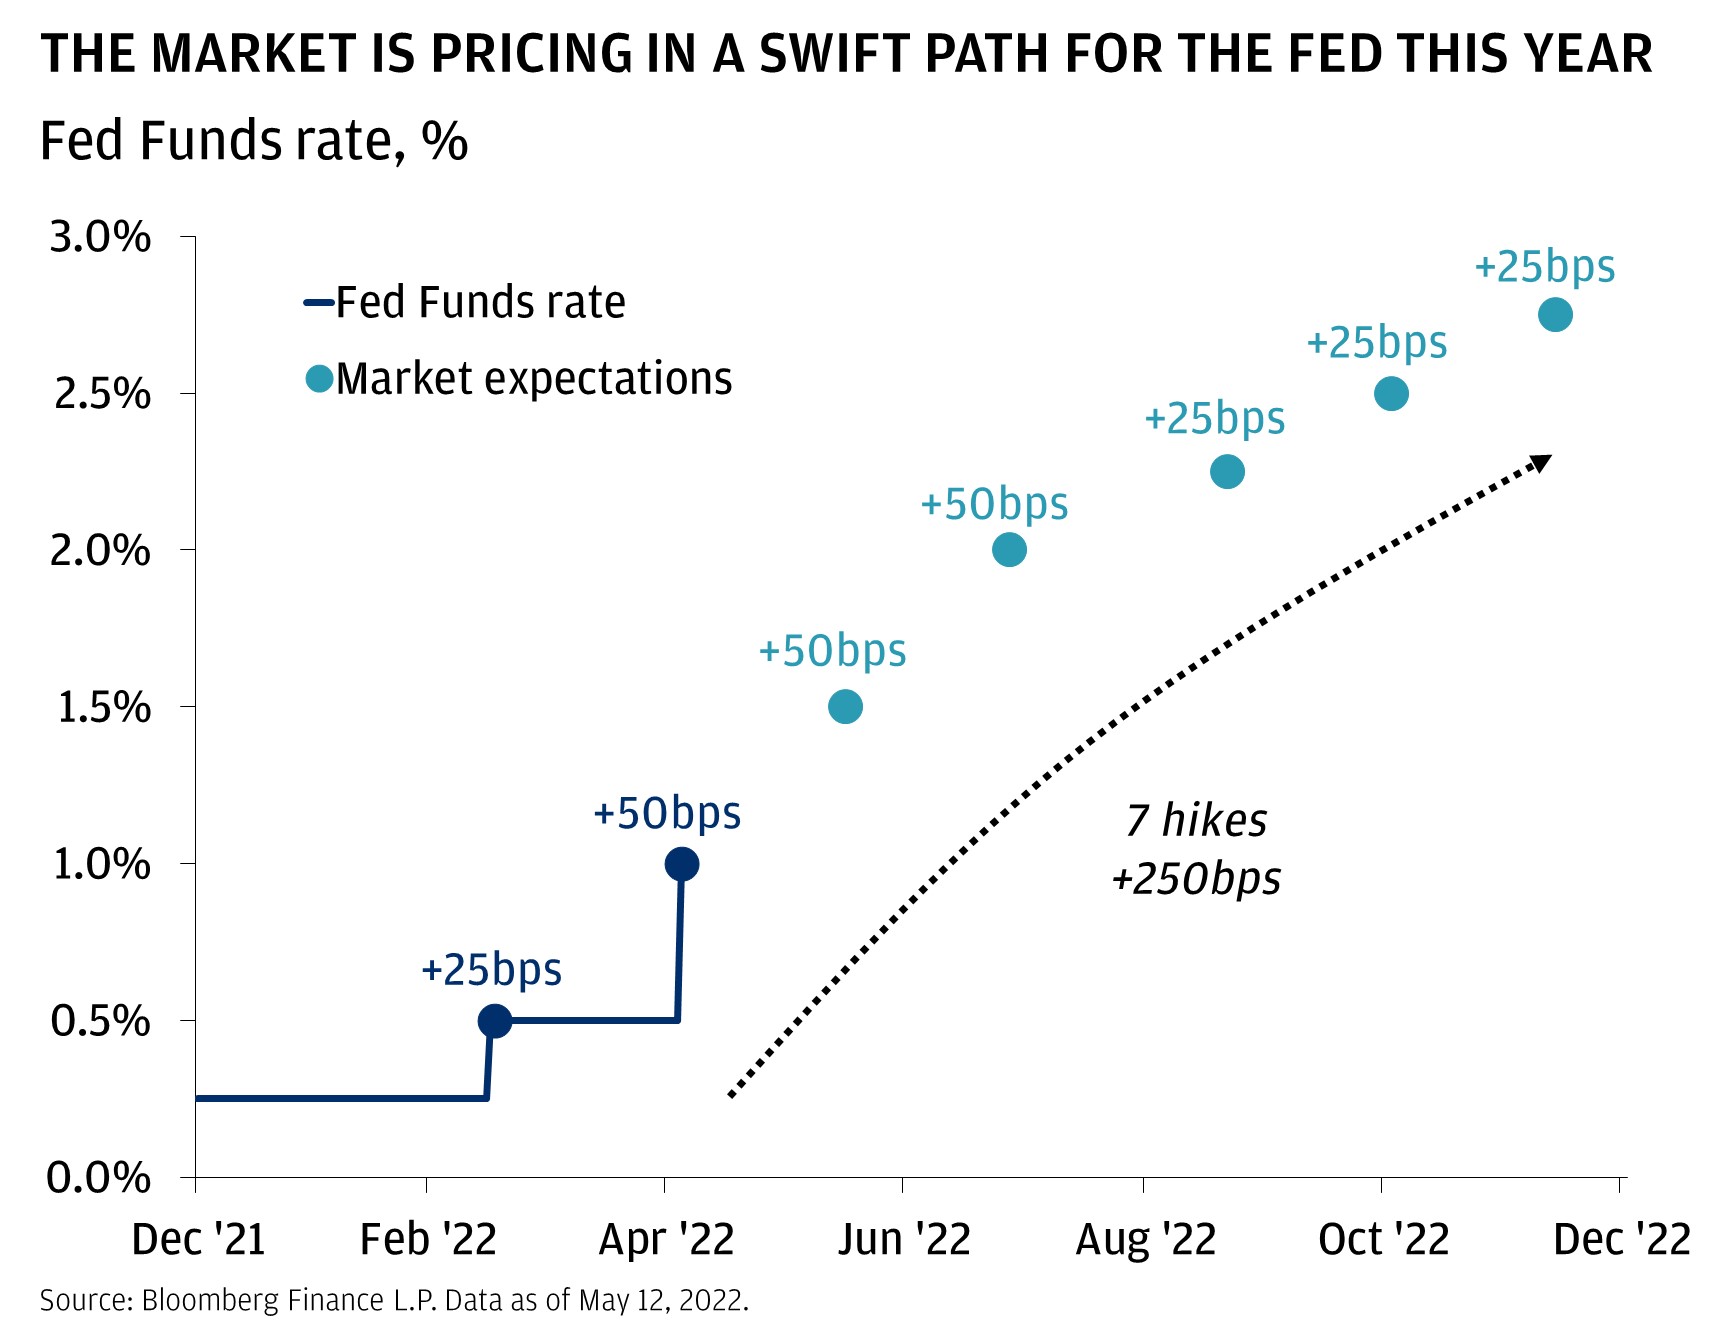 This chart shows the fed funds rate and market expectations from December 2021 until December 2022.